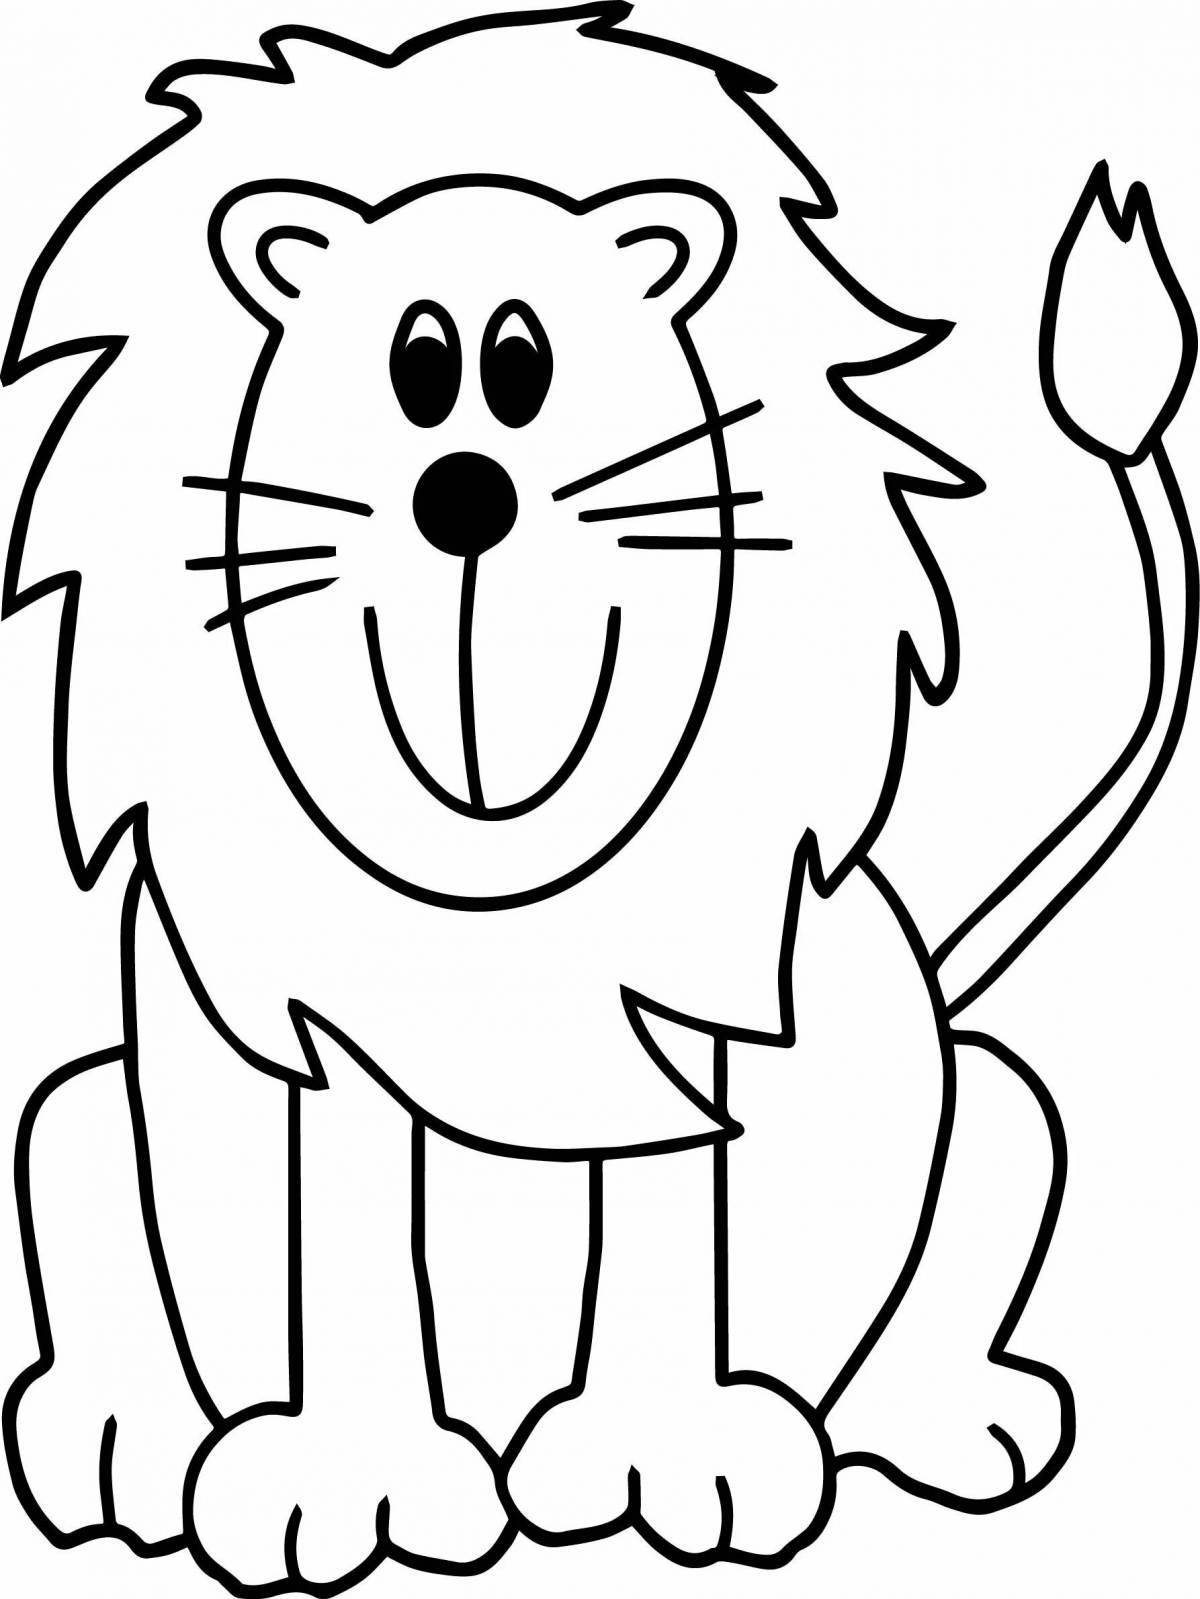 Graceful lion coloring for kids